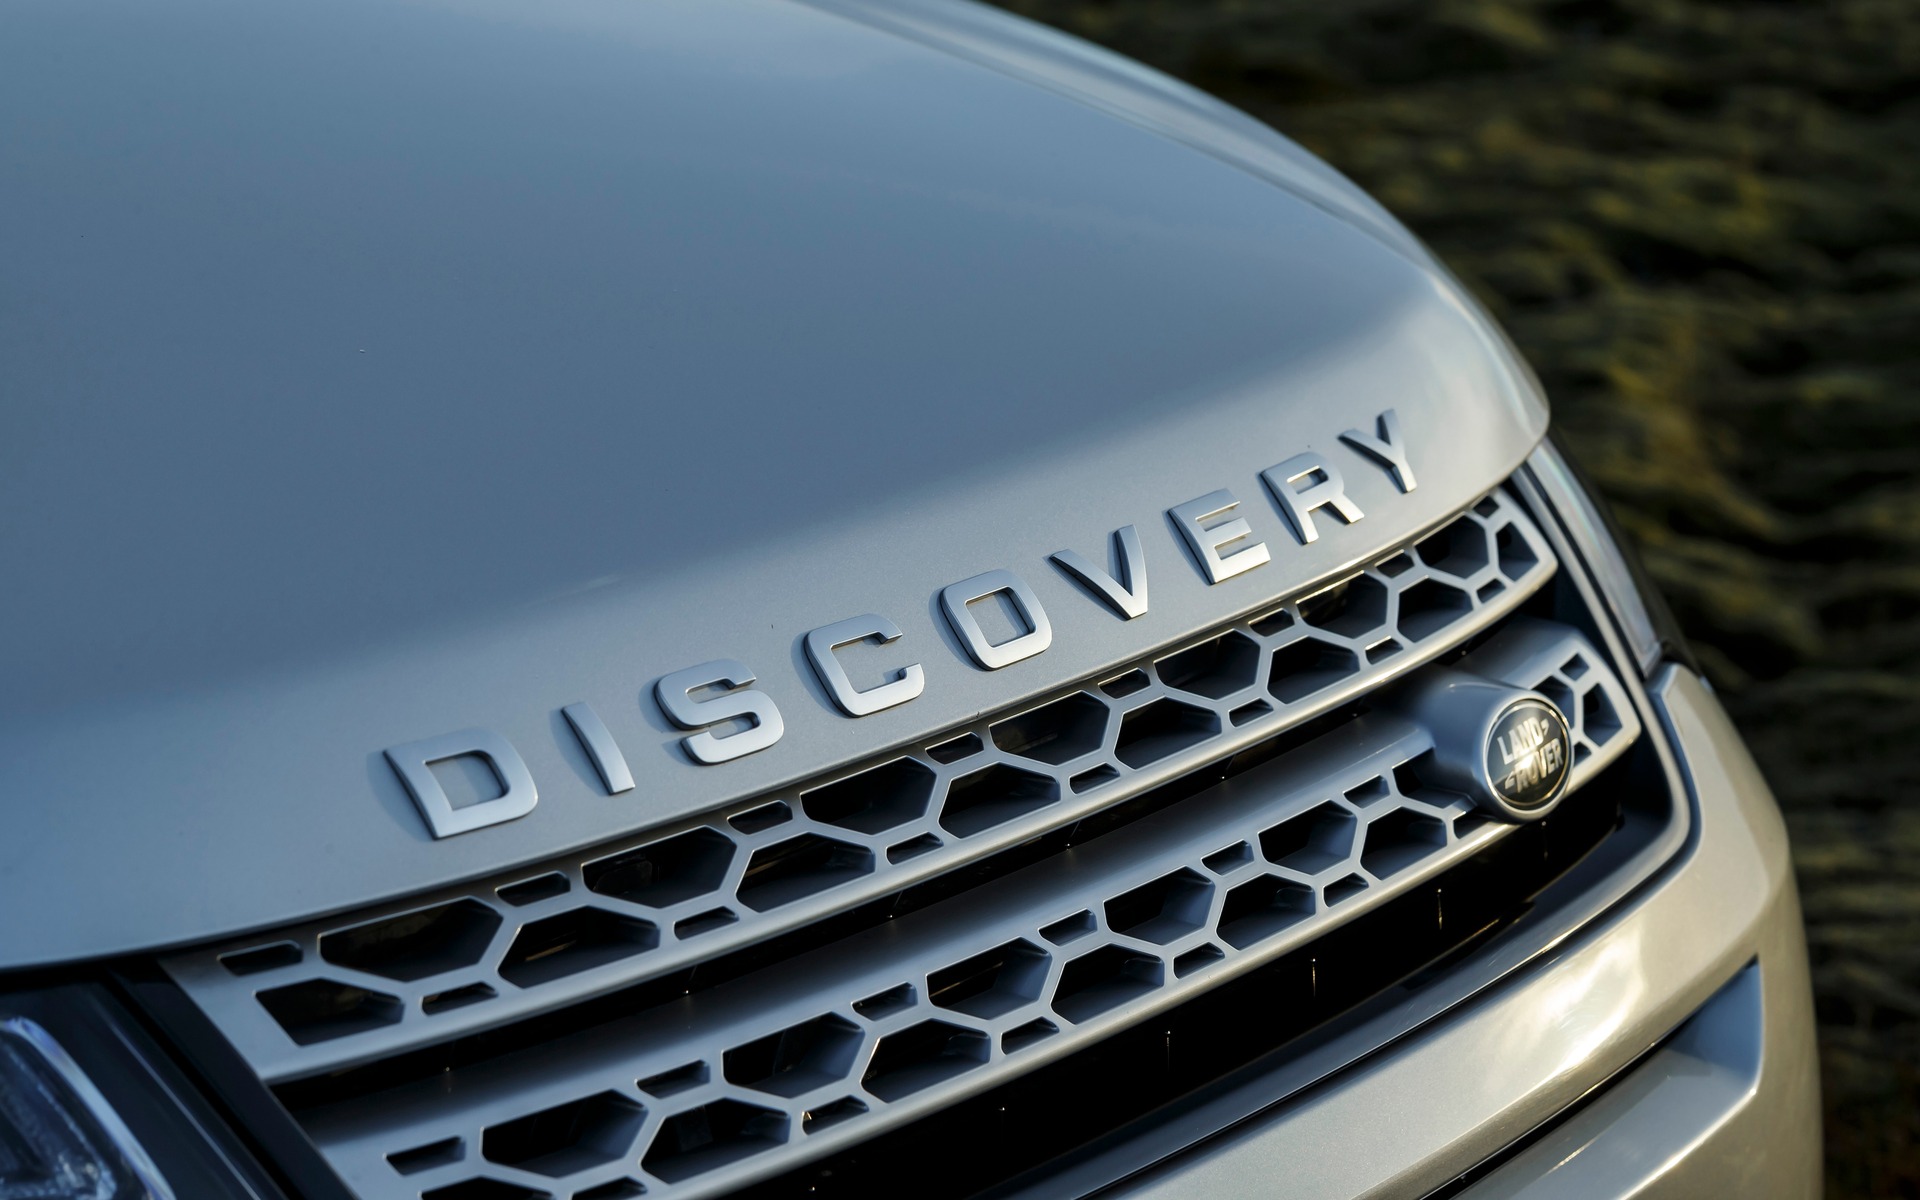 2015 Land Rover Discovery Sport 